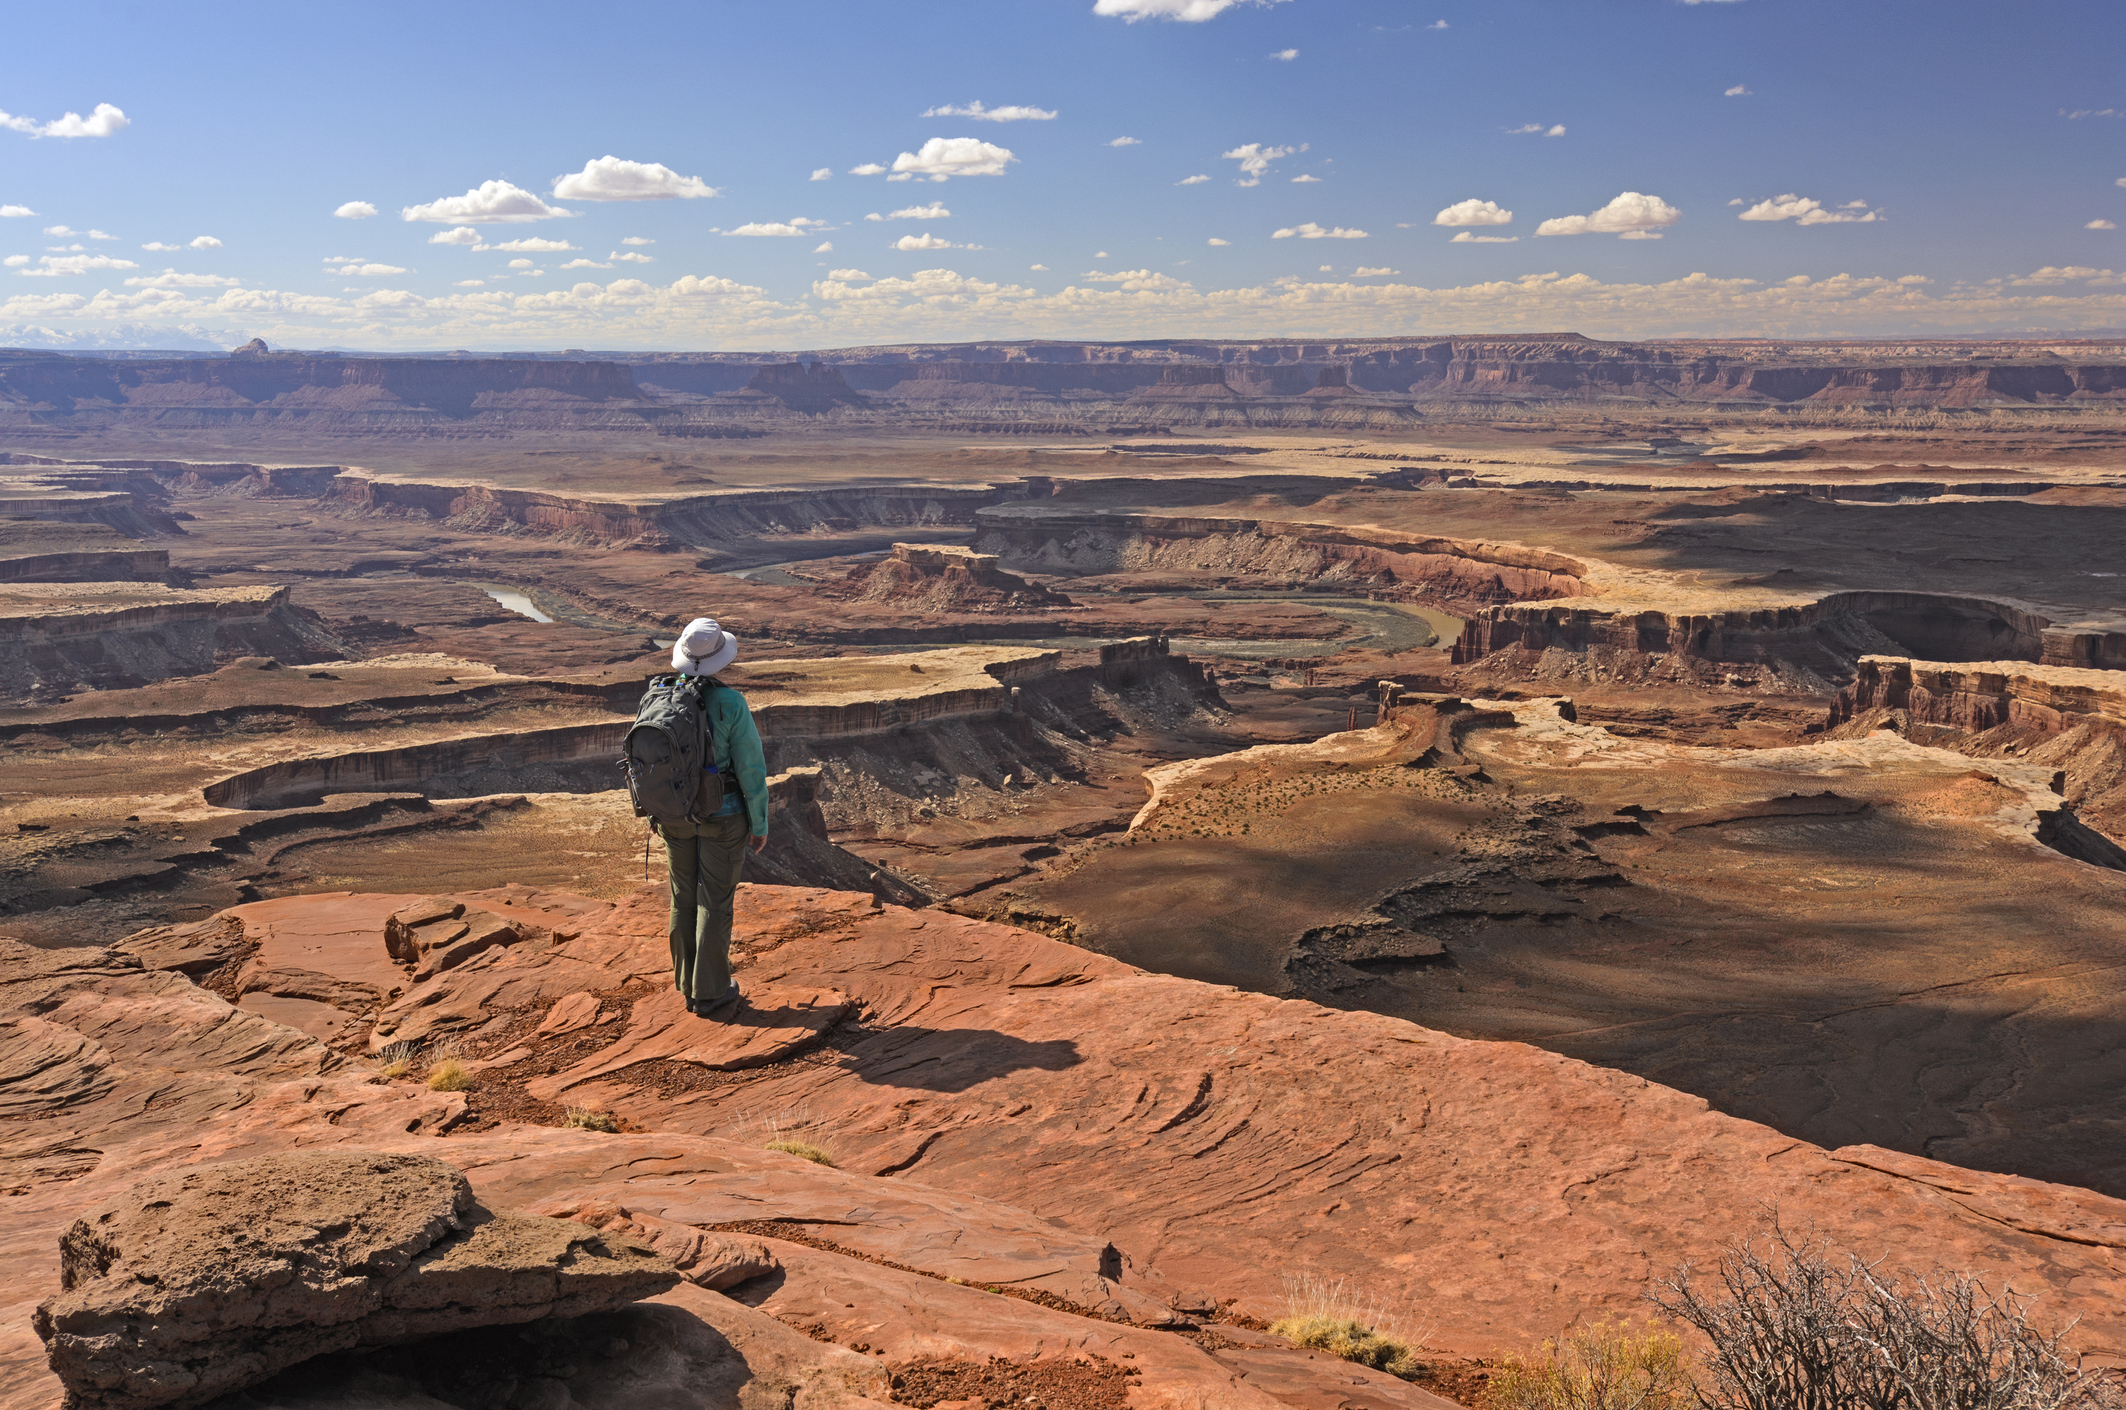 A lone hikers stands on the edge of a cliff and looks out at a landscape of cliff faces and ridges.